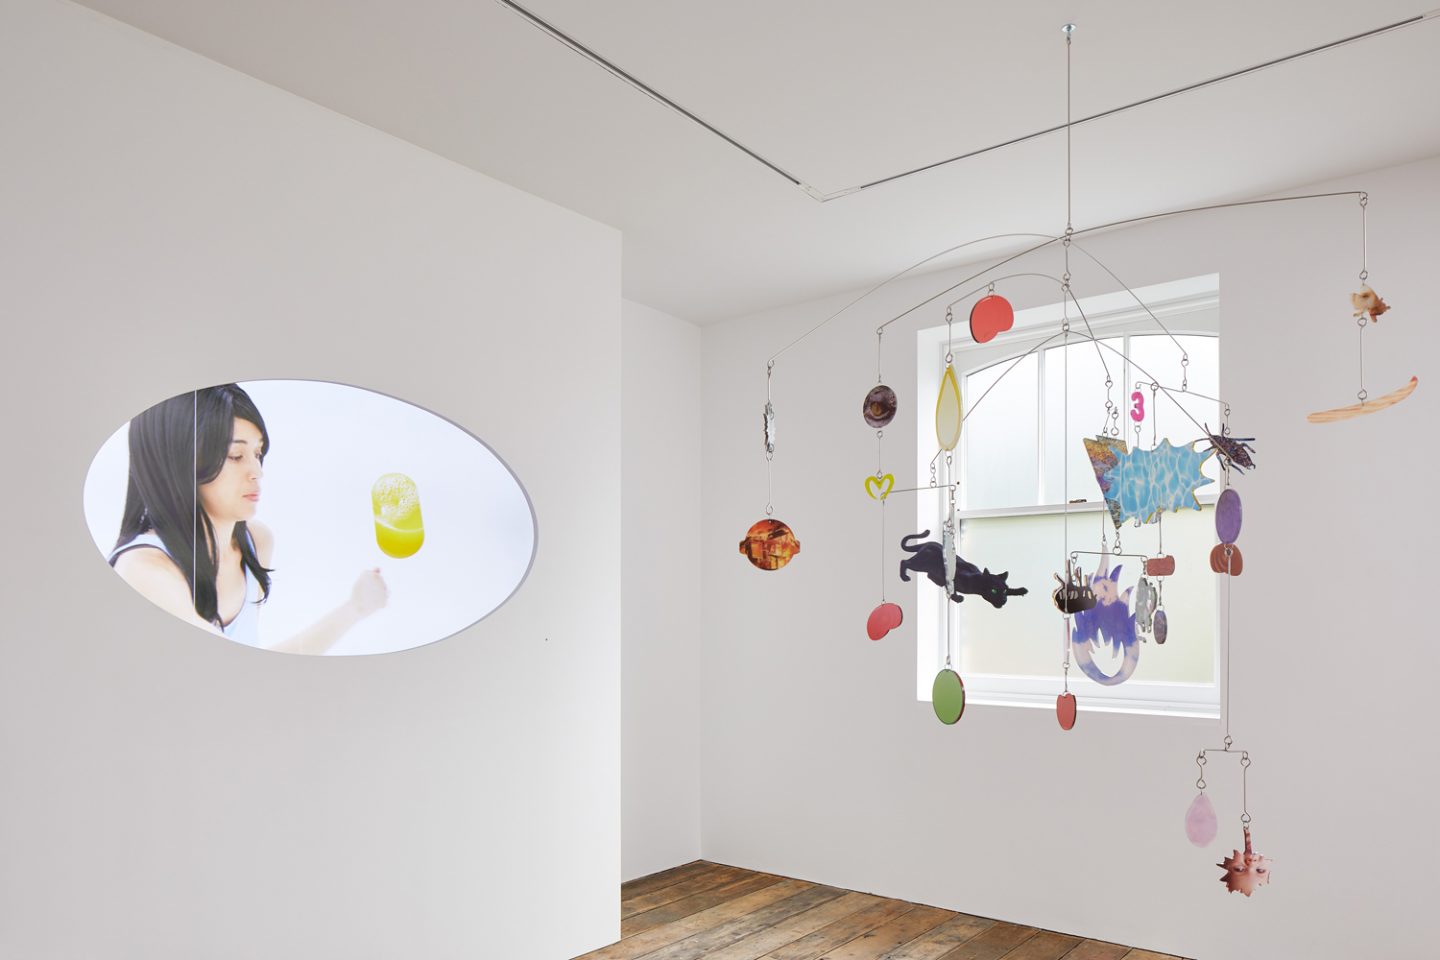 Installation view of KNOCK KNOCK at South London Gallery (22 September – 18 November 2018)
Pictured: She (2017) and KEEP OUT OF REACH OF CHILDREN (2018) by Danielle Dean
Photo: Andy Stagg
